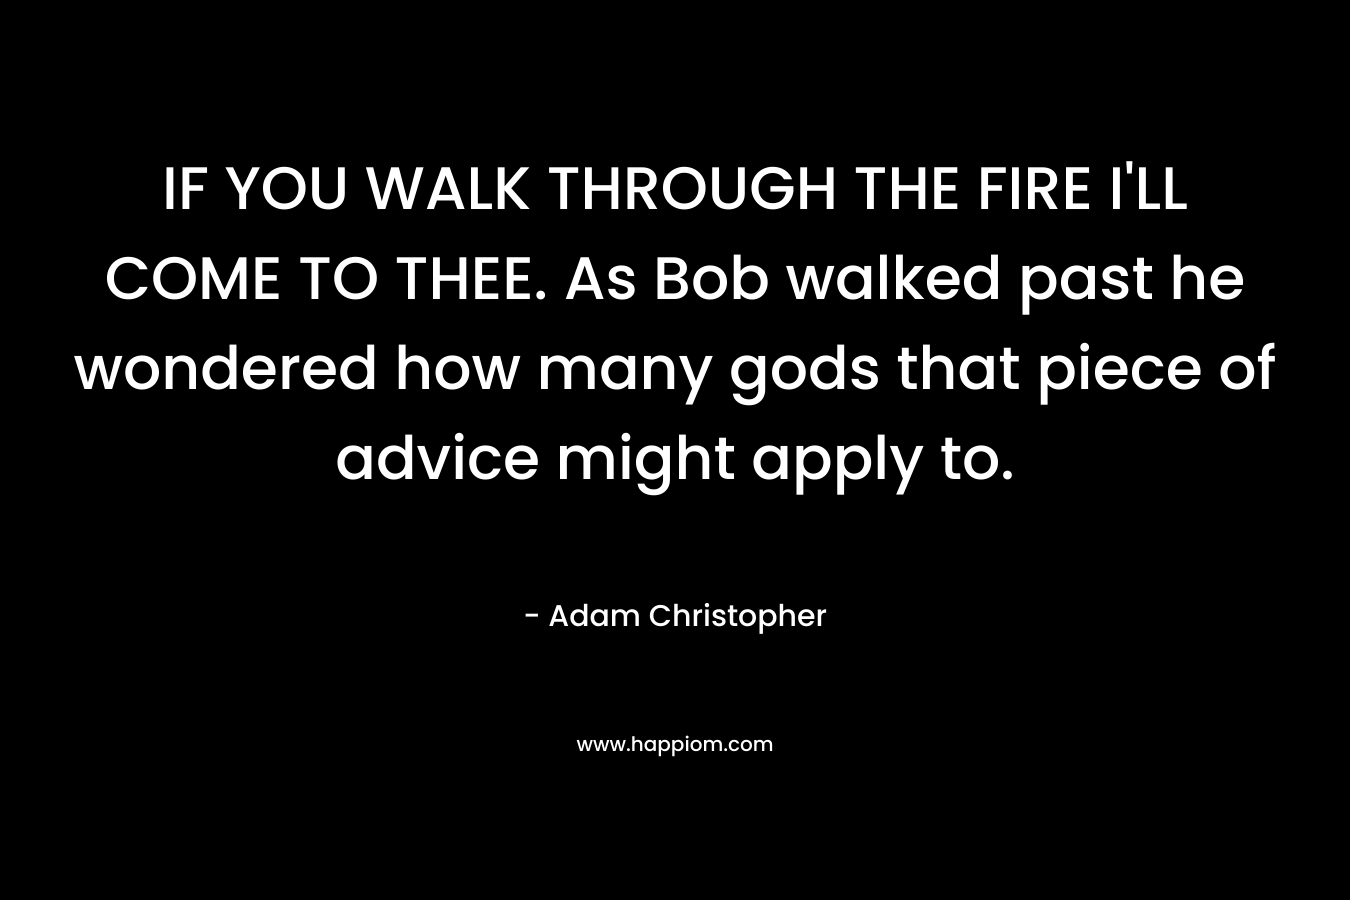 IF YOU WALK THROUGH THE FIRE I’LL COME TO THEE. As Bob walked past he wondered how many gods that piece of advice might apply to. – Adam Christopher